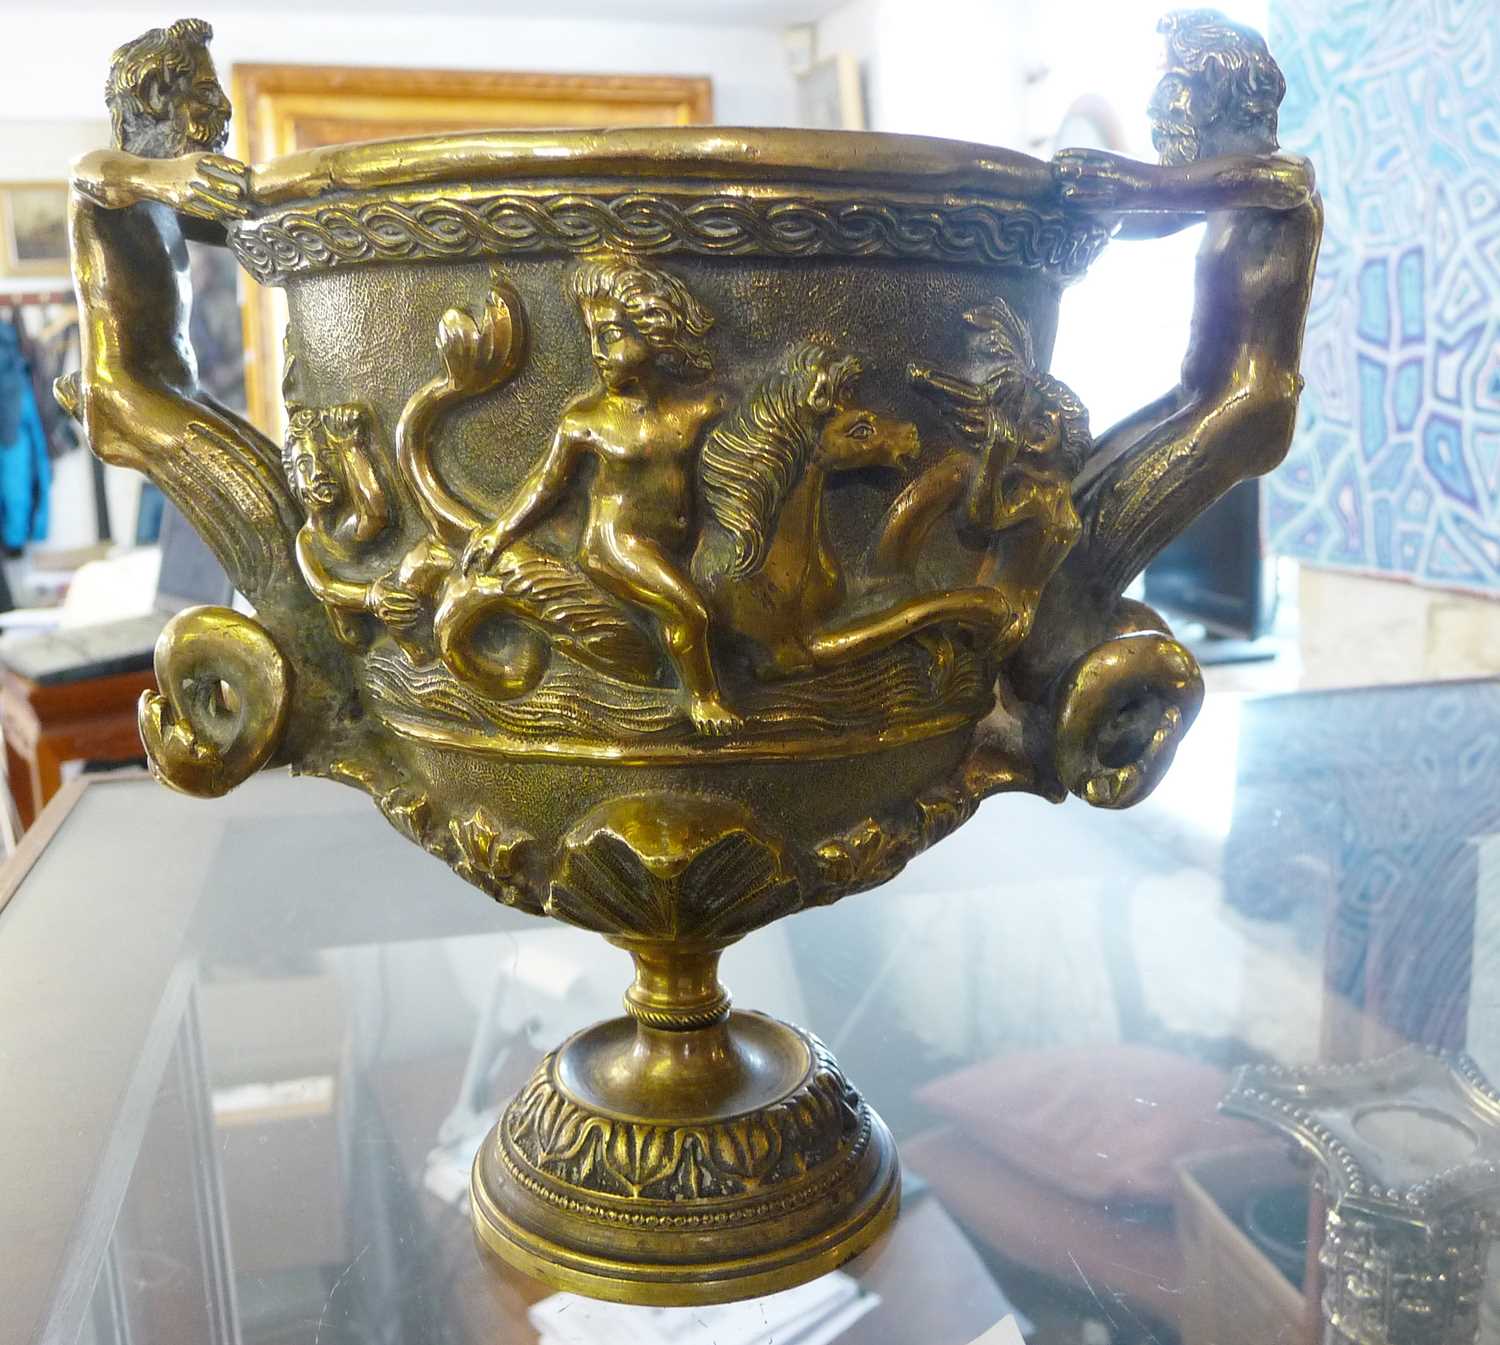 19th century Italian burnished bronze chalice with two Mermen handles and classical marine relief - Image 2 of 3